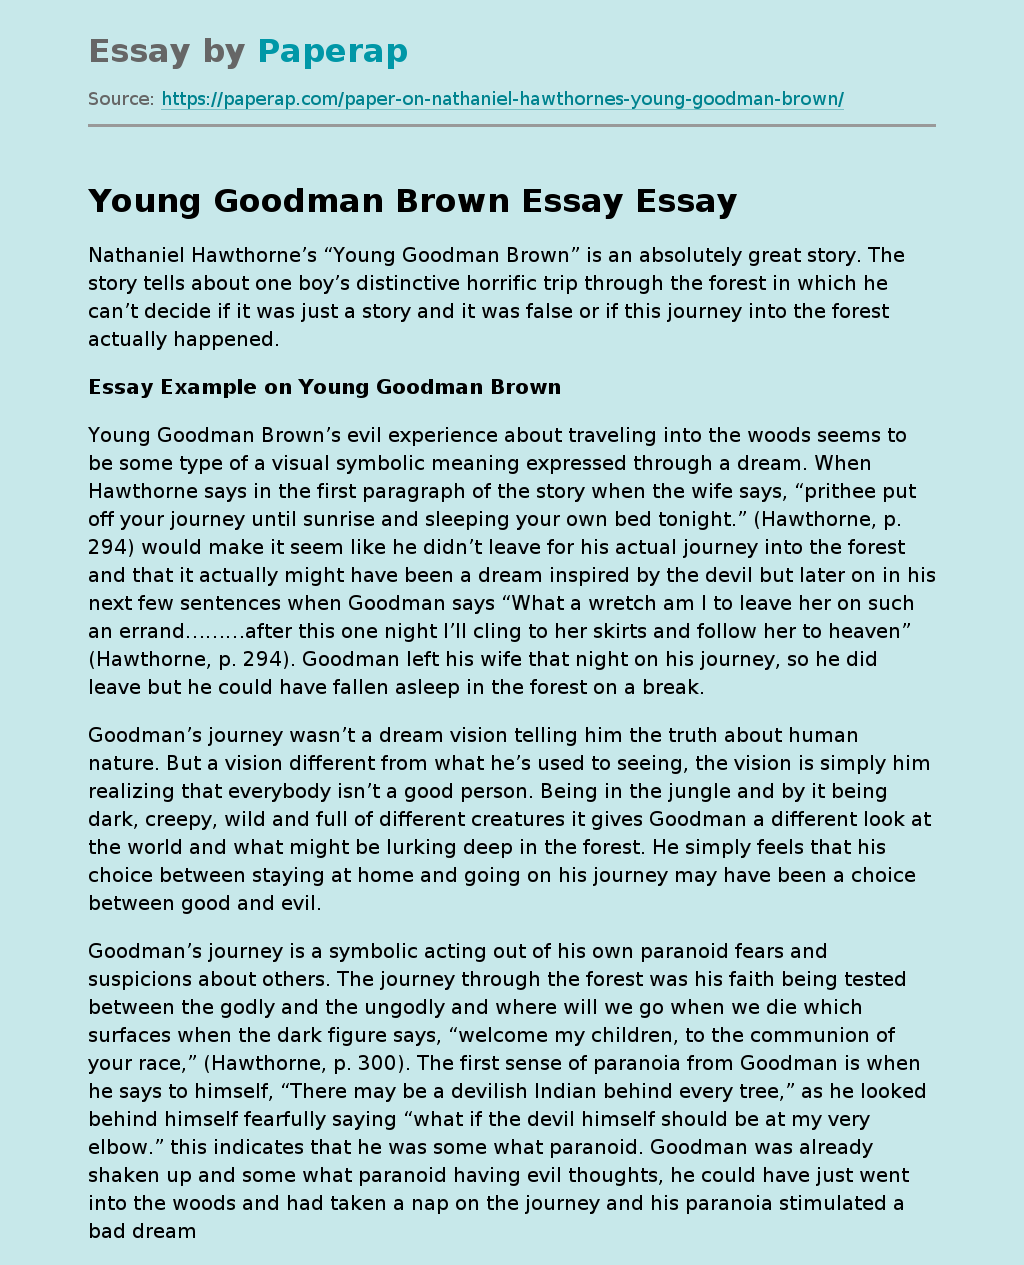 Essay Example on Young Goodman Brown